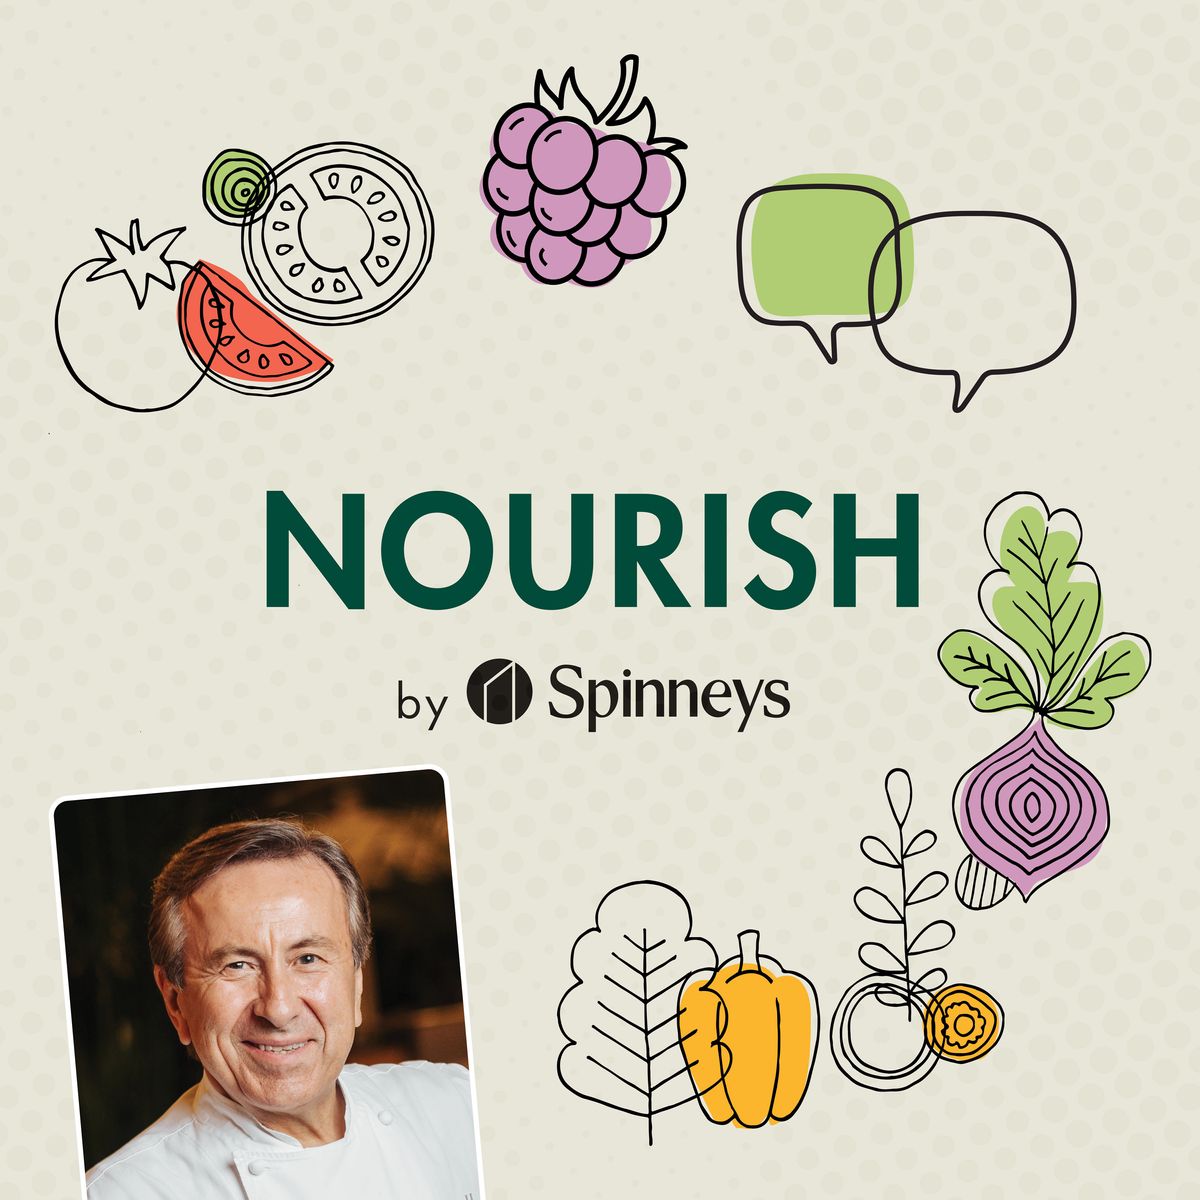 French Connection, with Chef Daniel Boulud